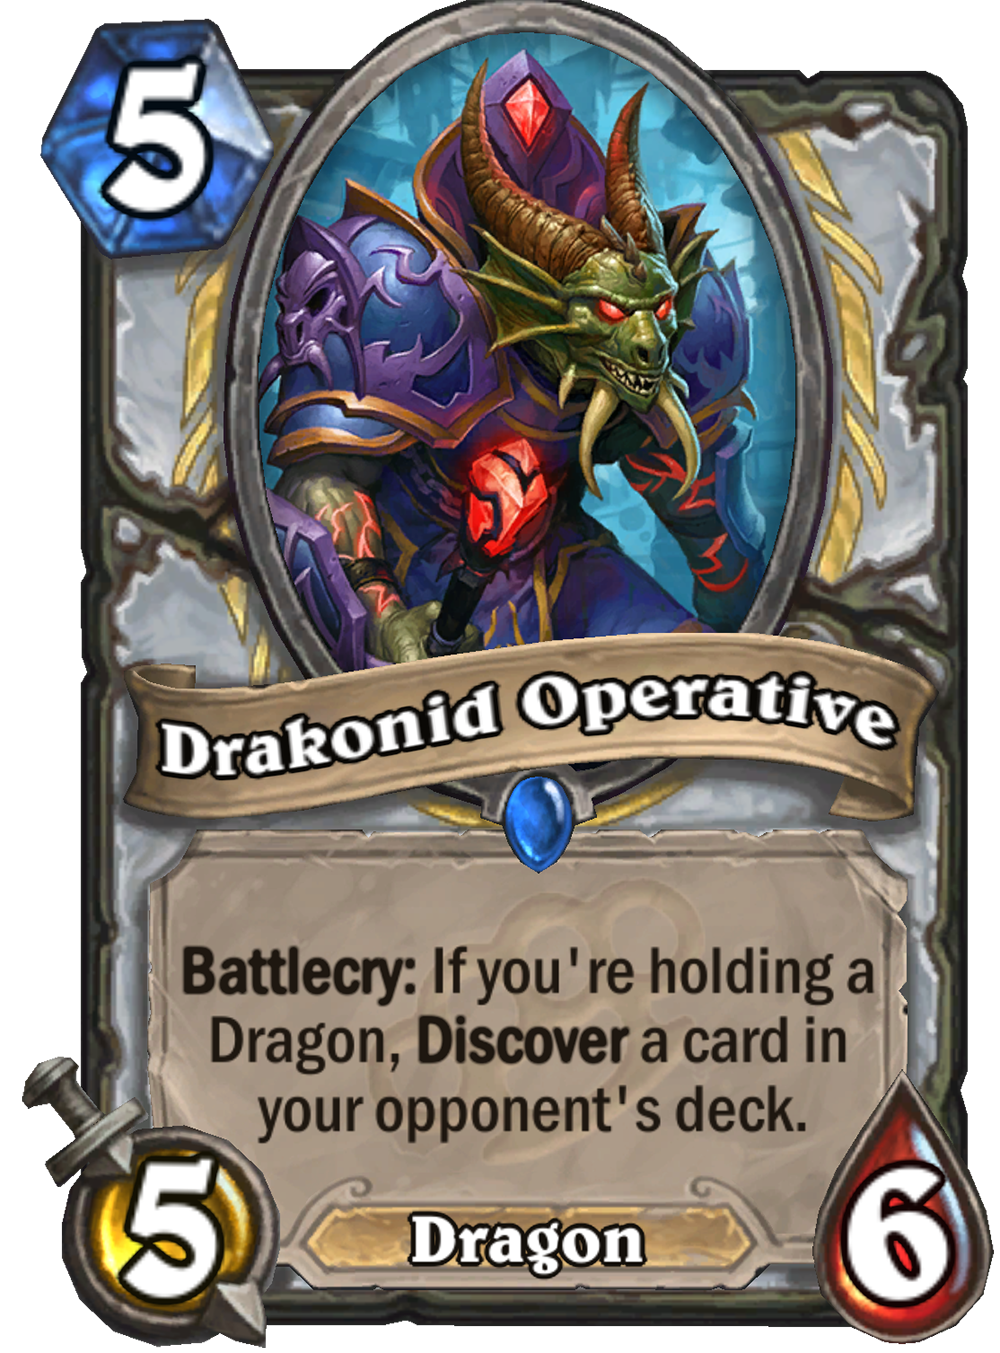 An image of Hearthstone's Drakonid Operative card. The art features a lizard-esque humanoid figure clad in purple armor and holding a glowing red crystal wand. The card has five attack and six health, and its text reads: "Battlecry: If you're holding a Dr